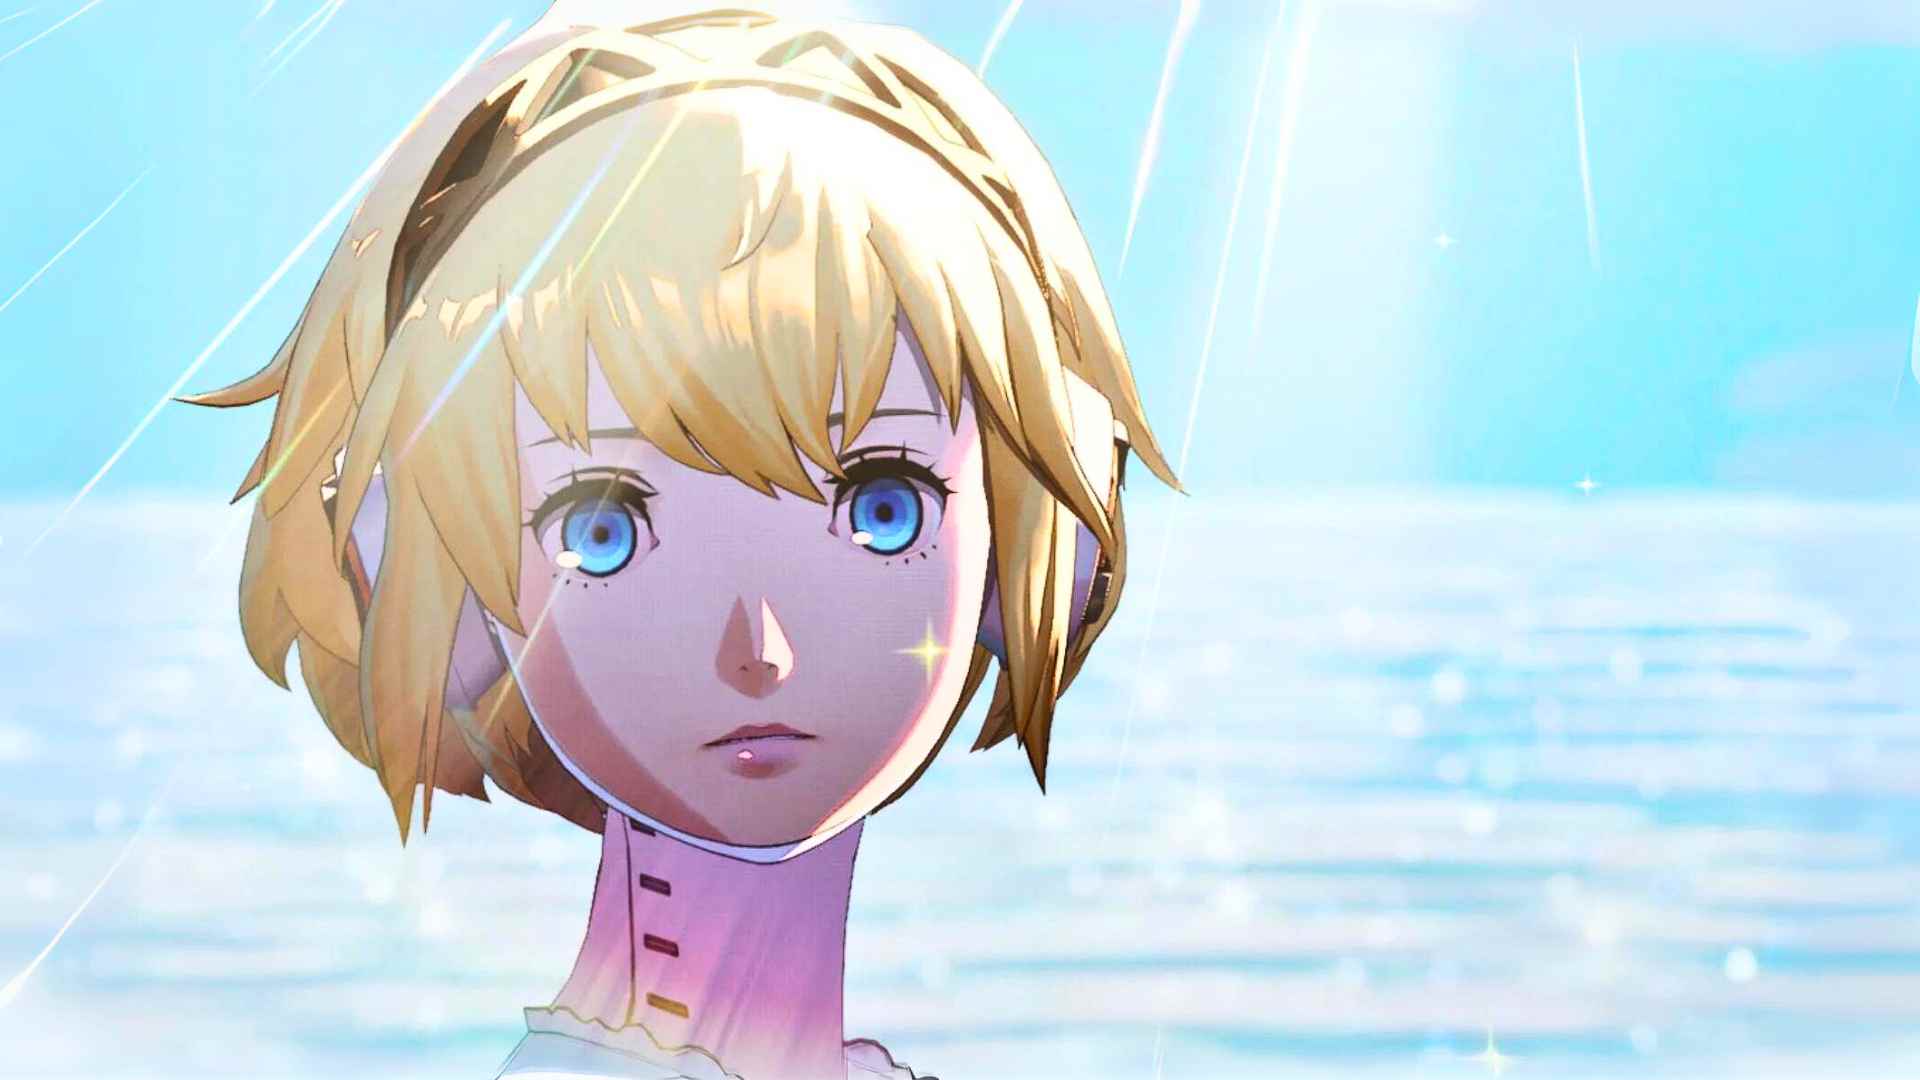 "Episode Aigis" was found under an expansion pass directory after Persona 3 Reload was datamined.